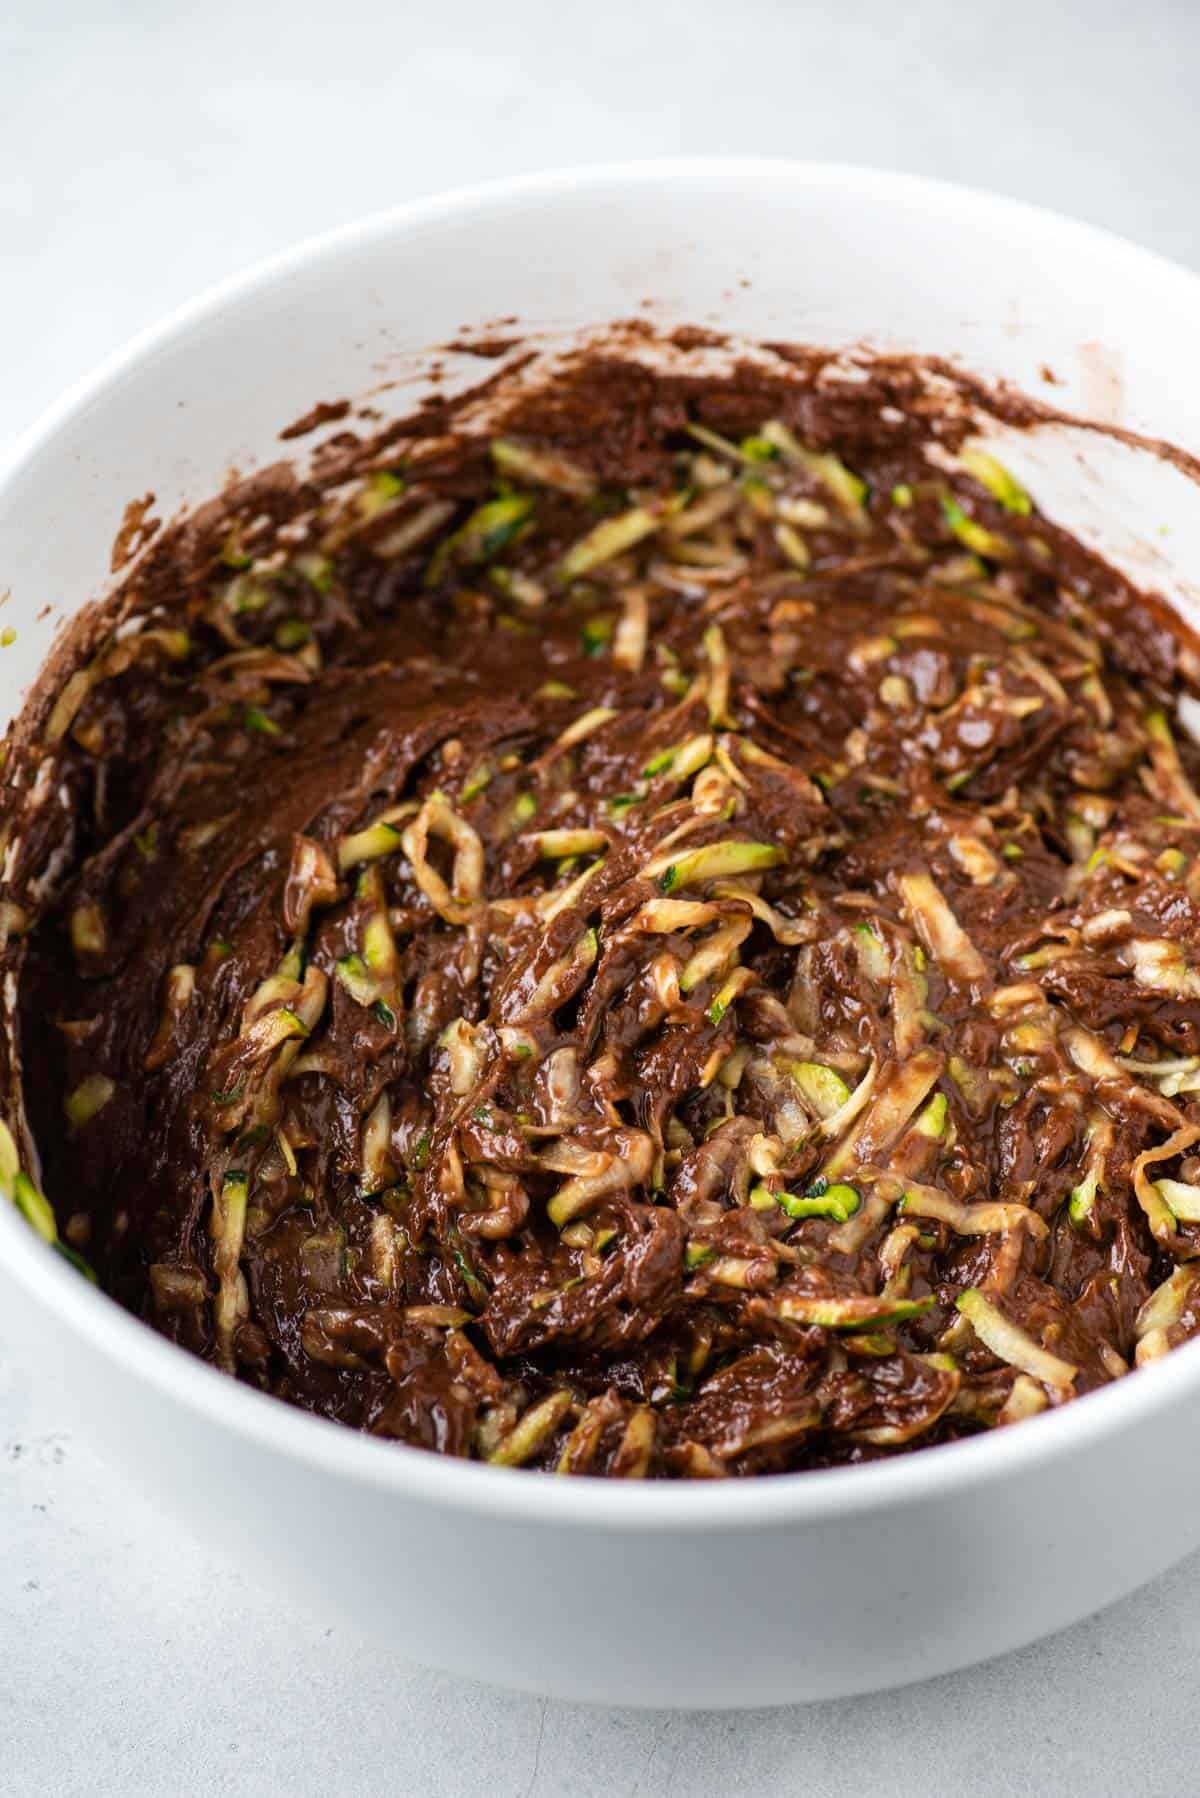 Shredded zucchini mixed in with chocolate muffin batter